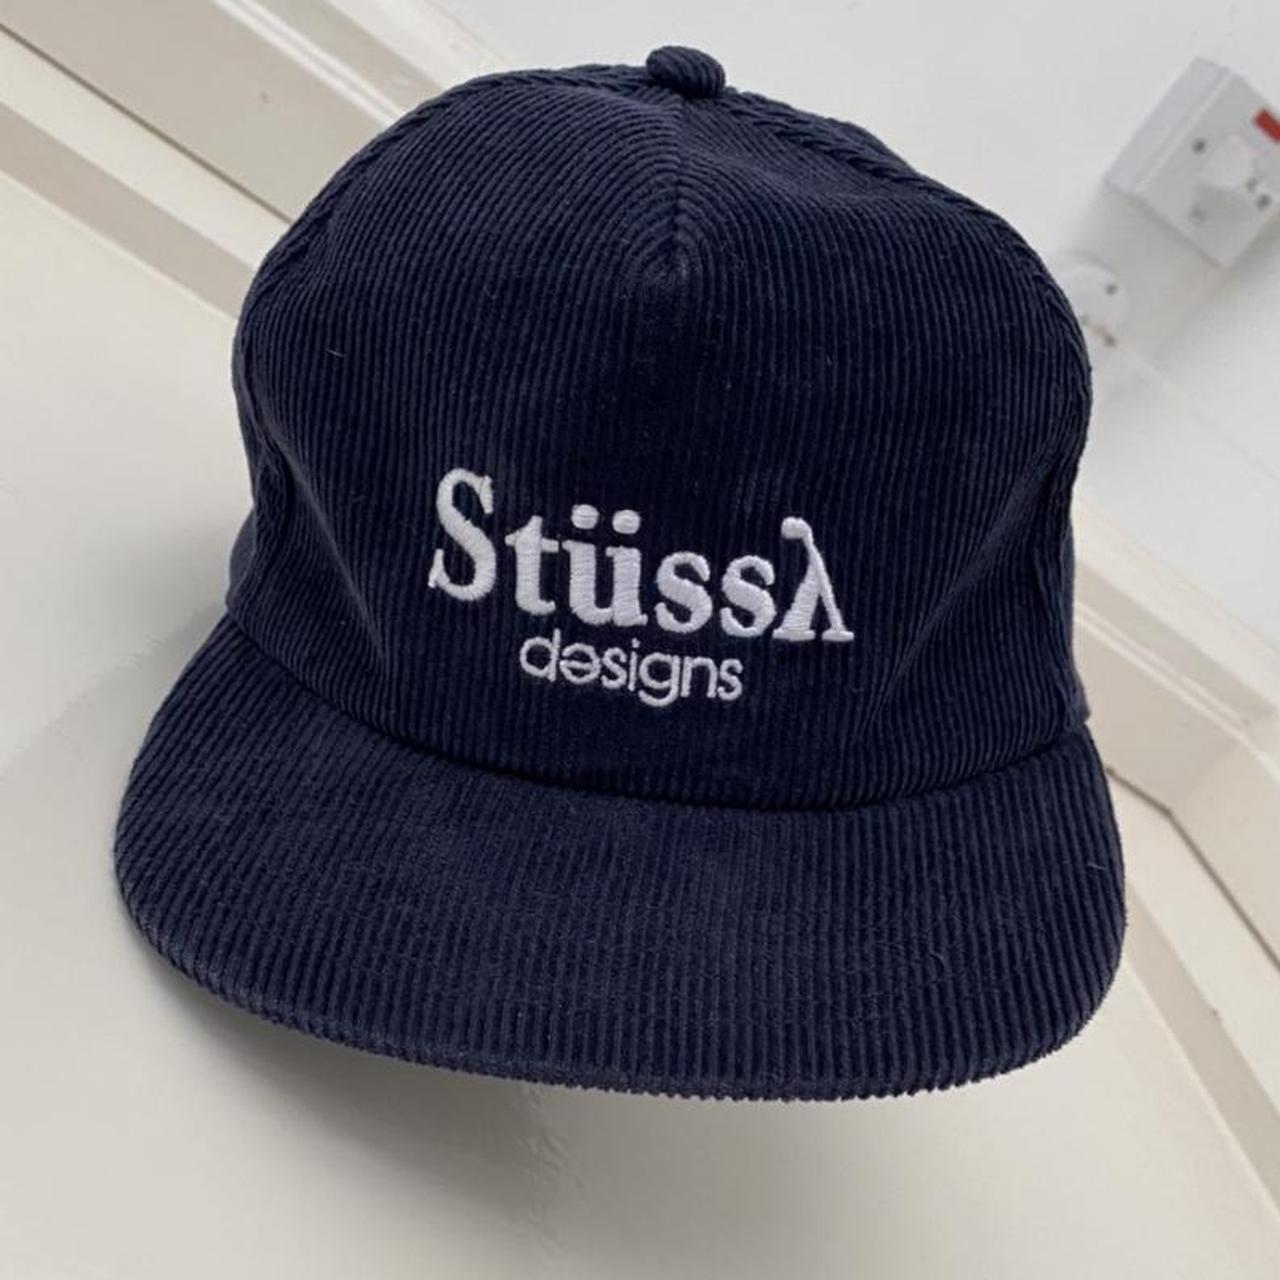 Product Image 1 - Cordial Stüssy hat readjusted size